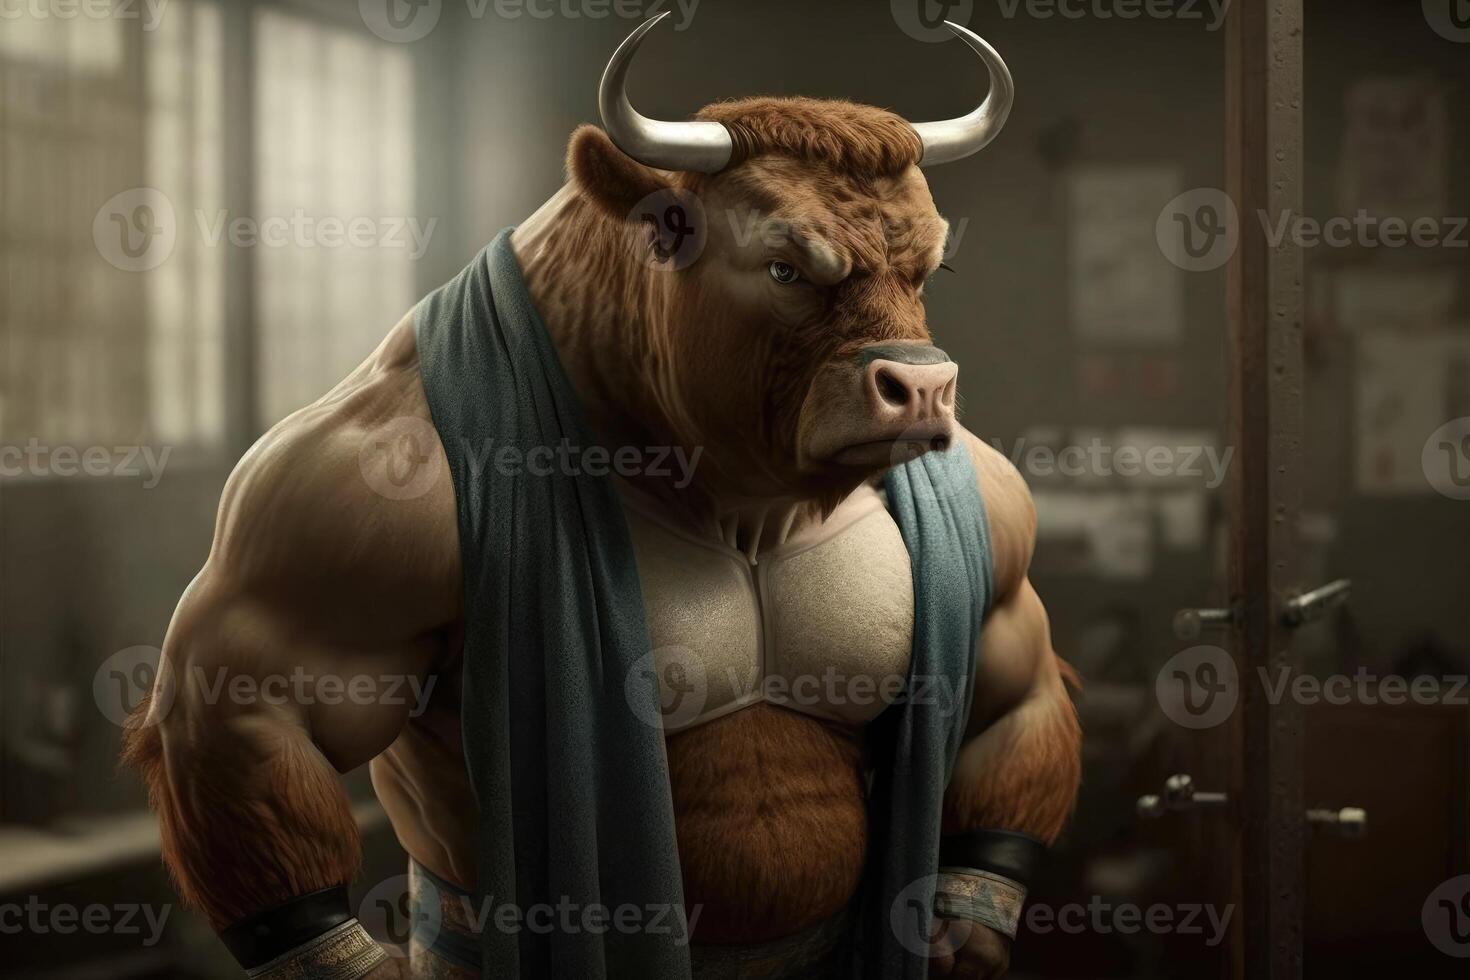 Bull wears workout cloth. Love health and fitness concept. photo